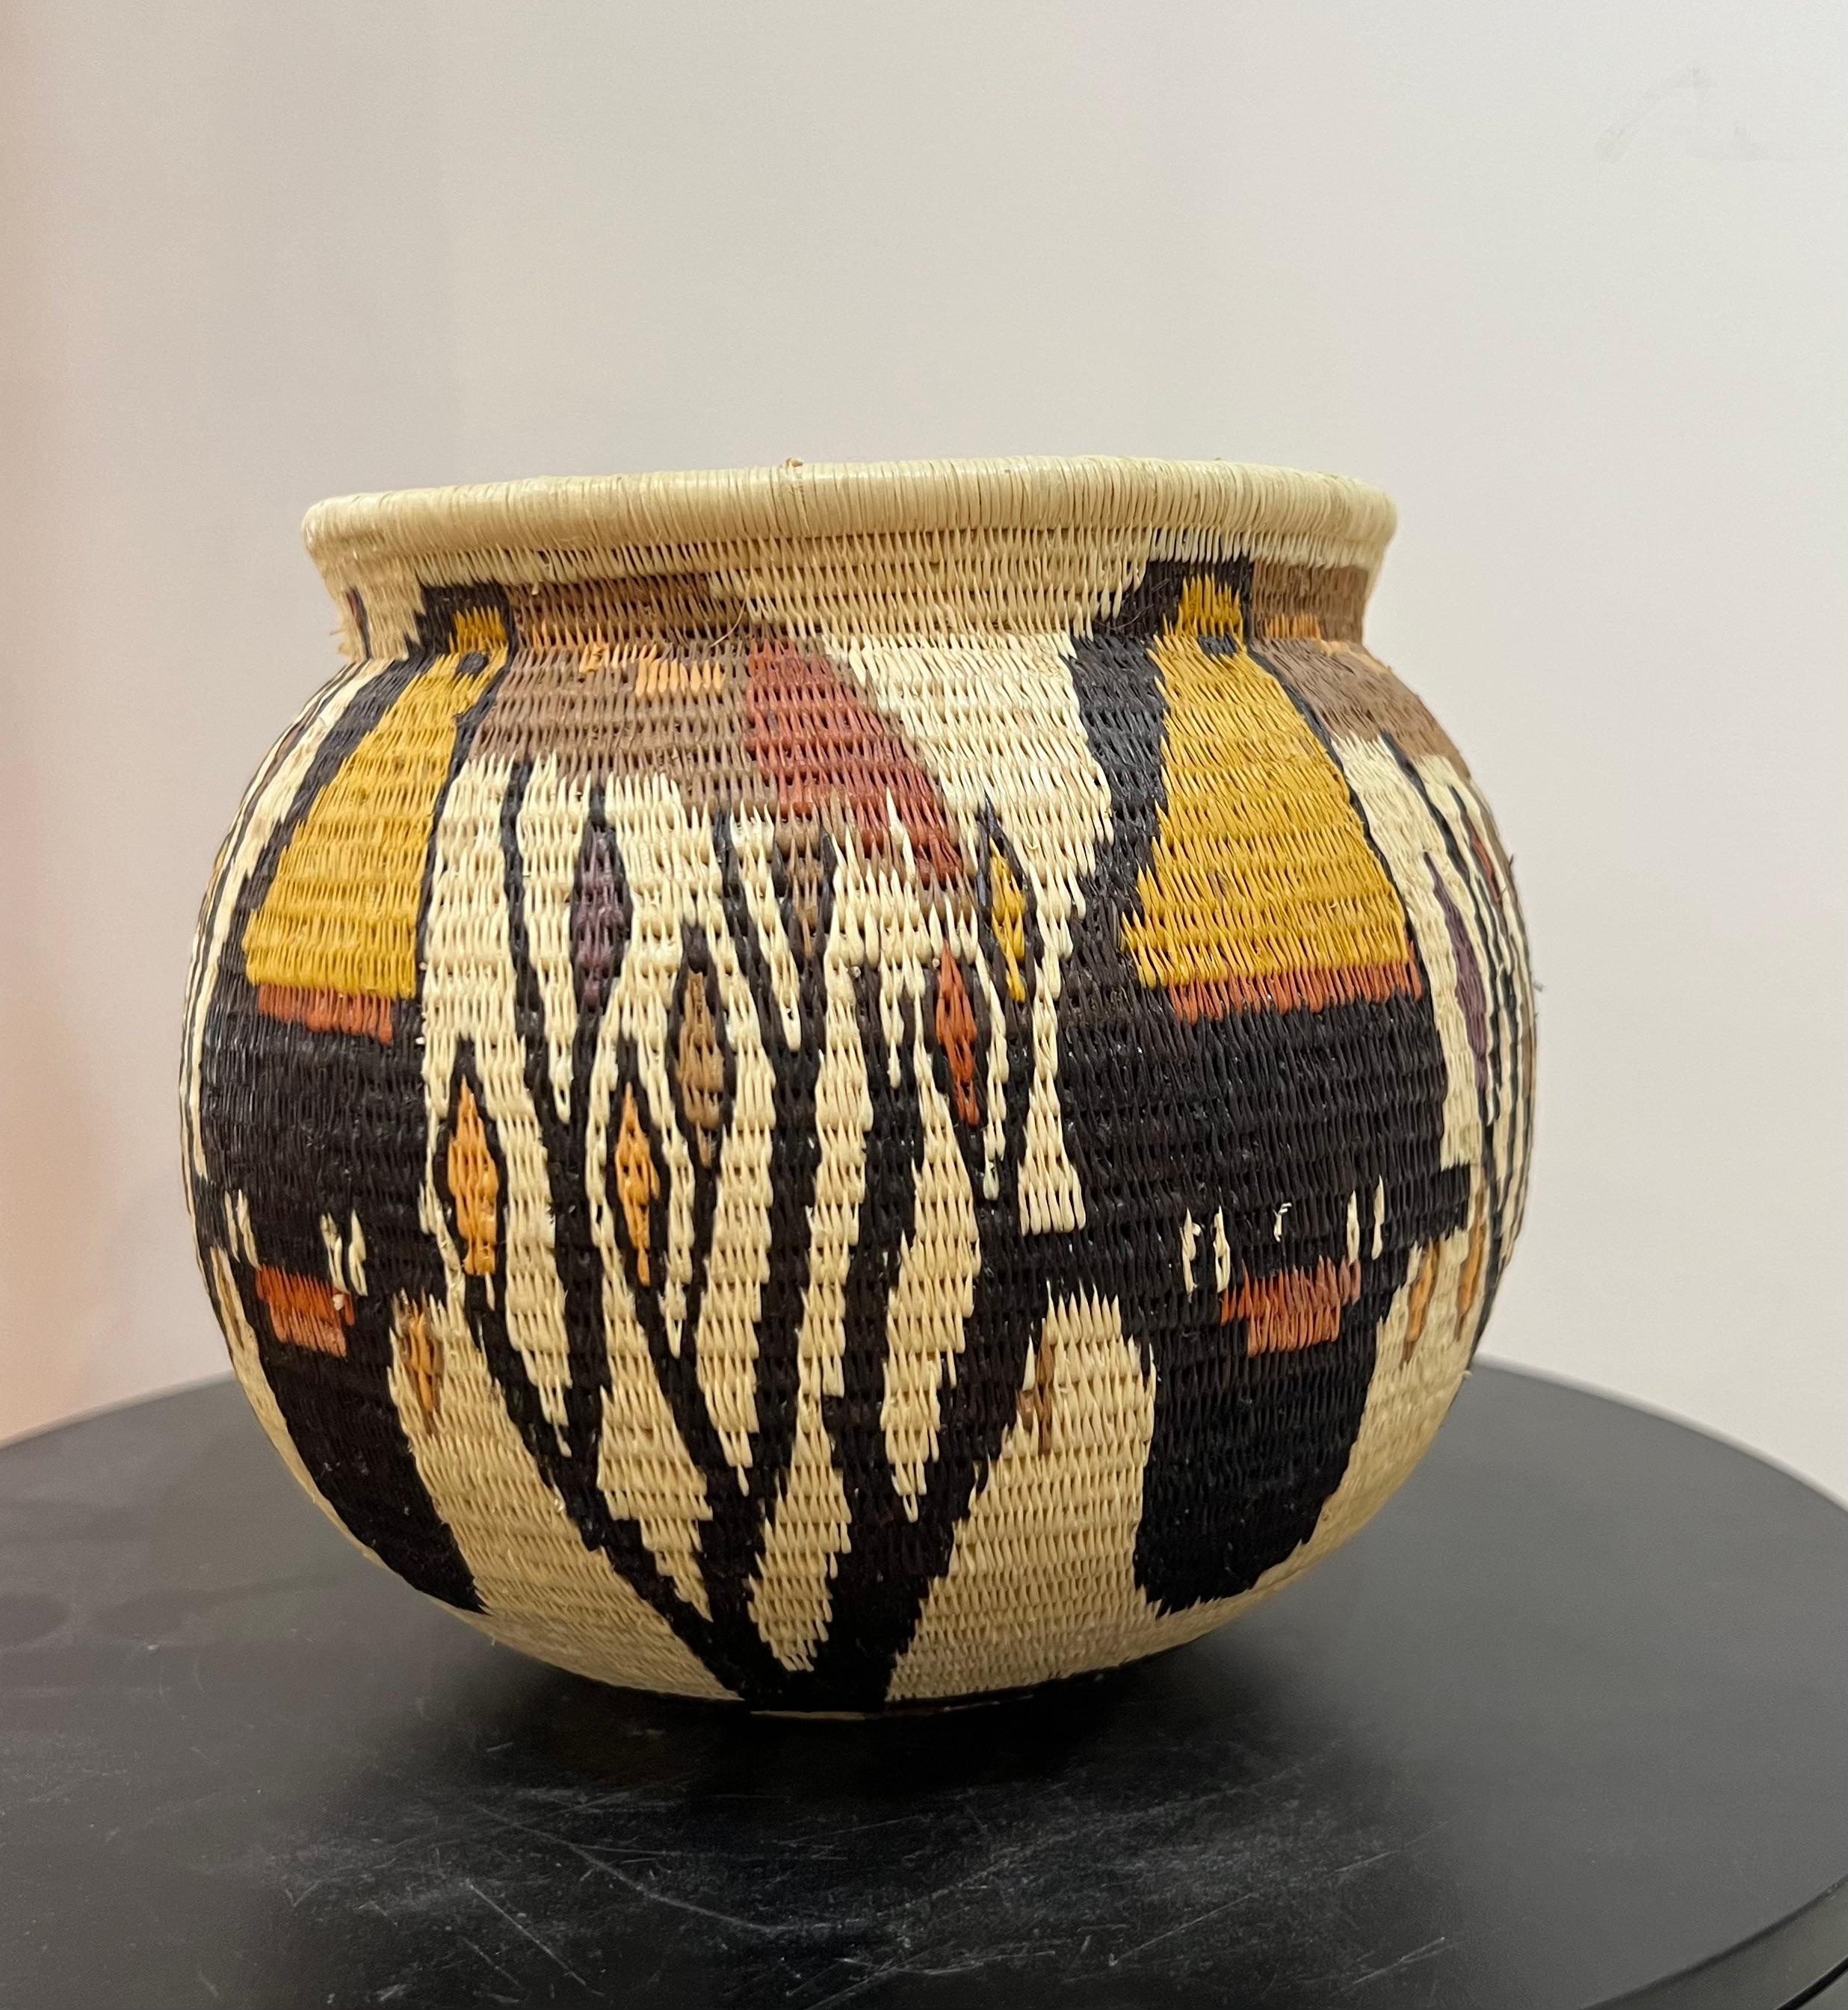 Toucan and Parrot Basket, yellow, cream, black, Tribal, Panama, Rainforest

The baskets are made by the Wounaan and Embera Indians from the Darien Rainforest in Panama.  The Wounaan believe they emerged from the palm tree. They weave baskets from